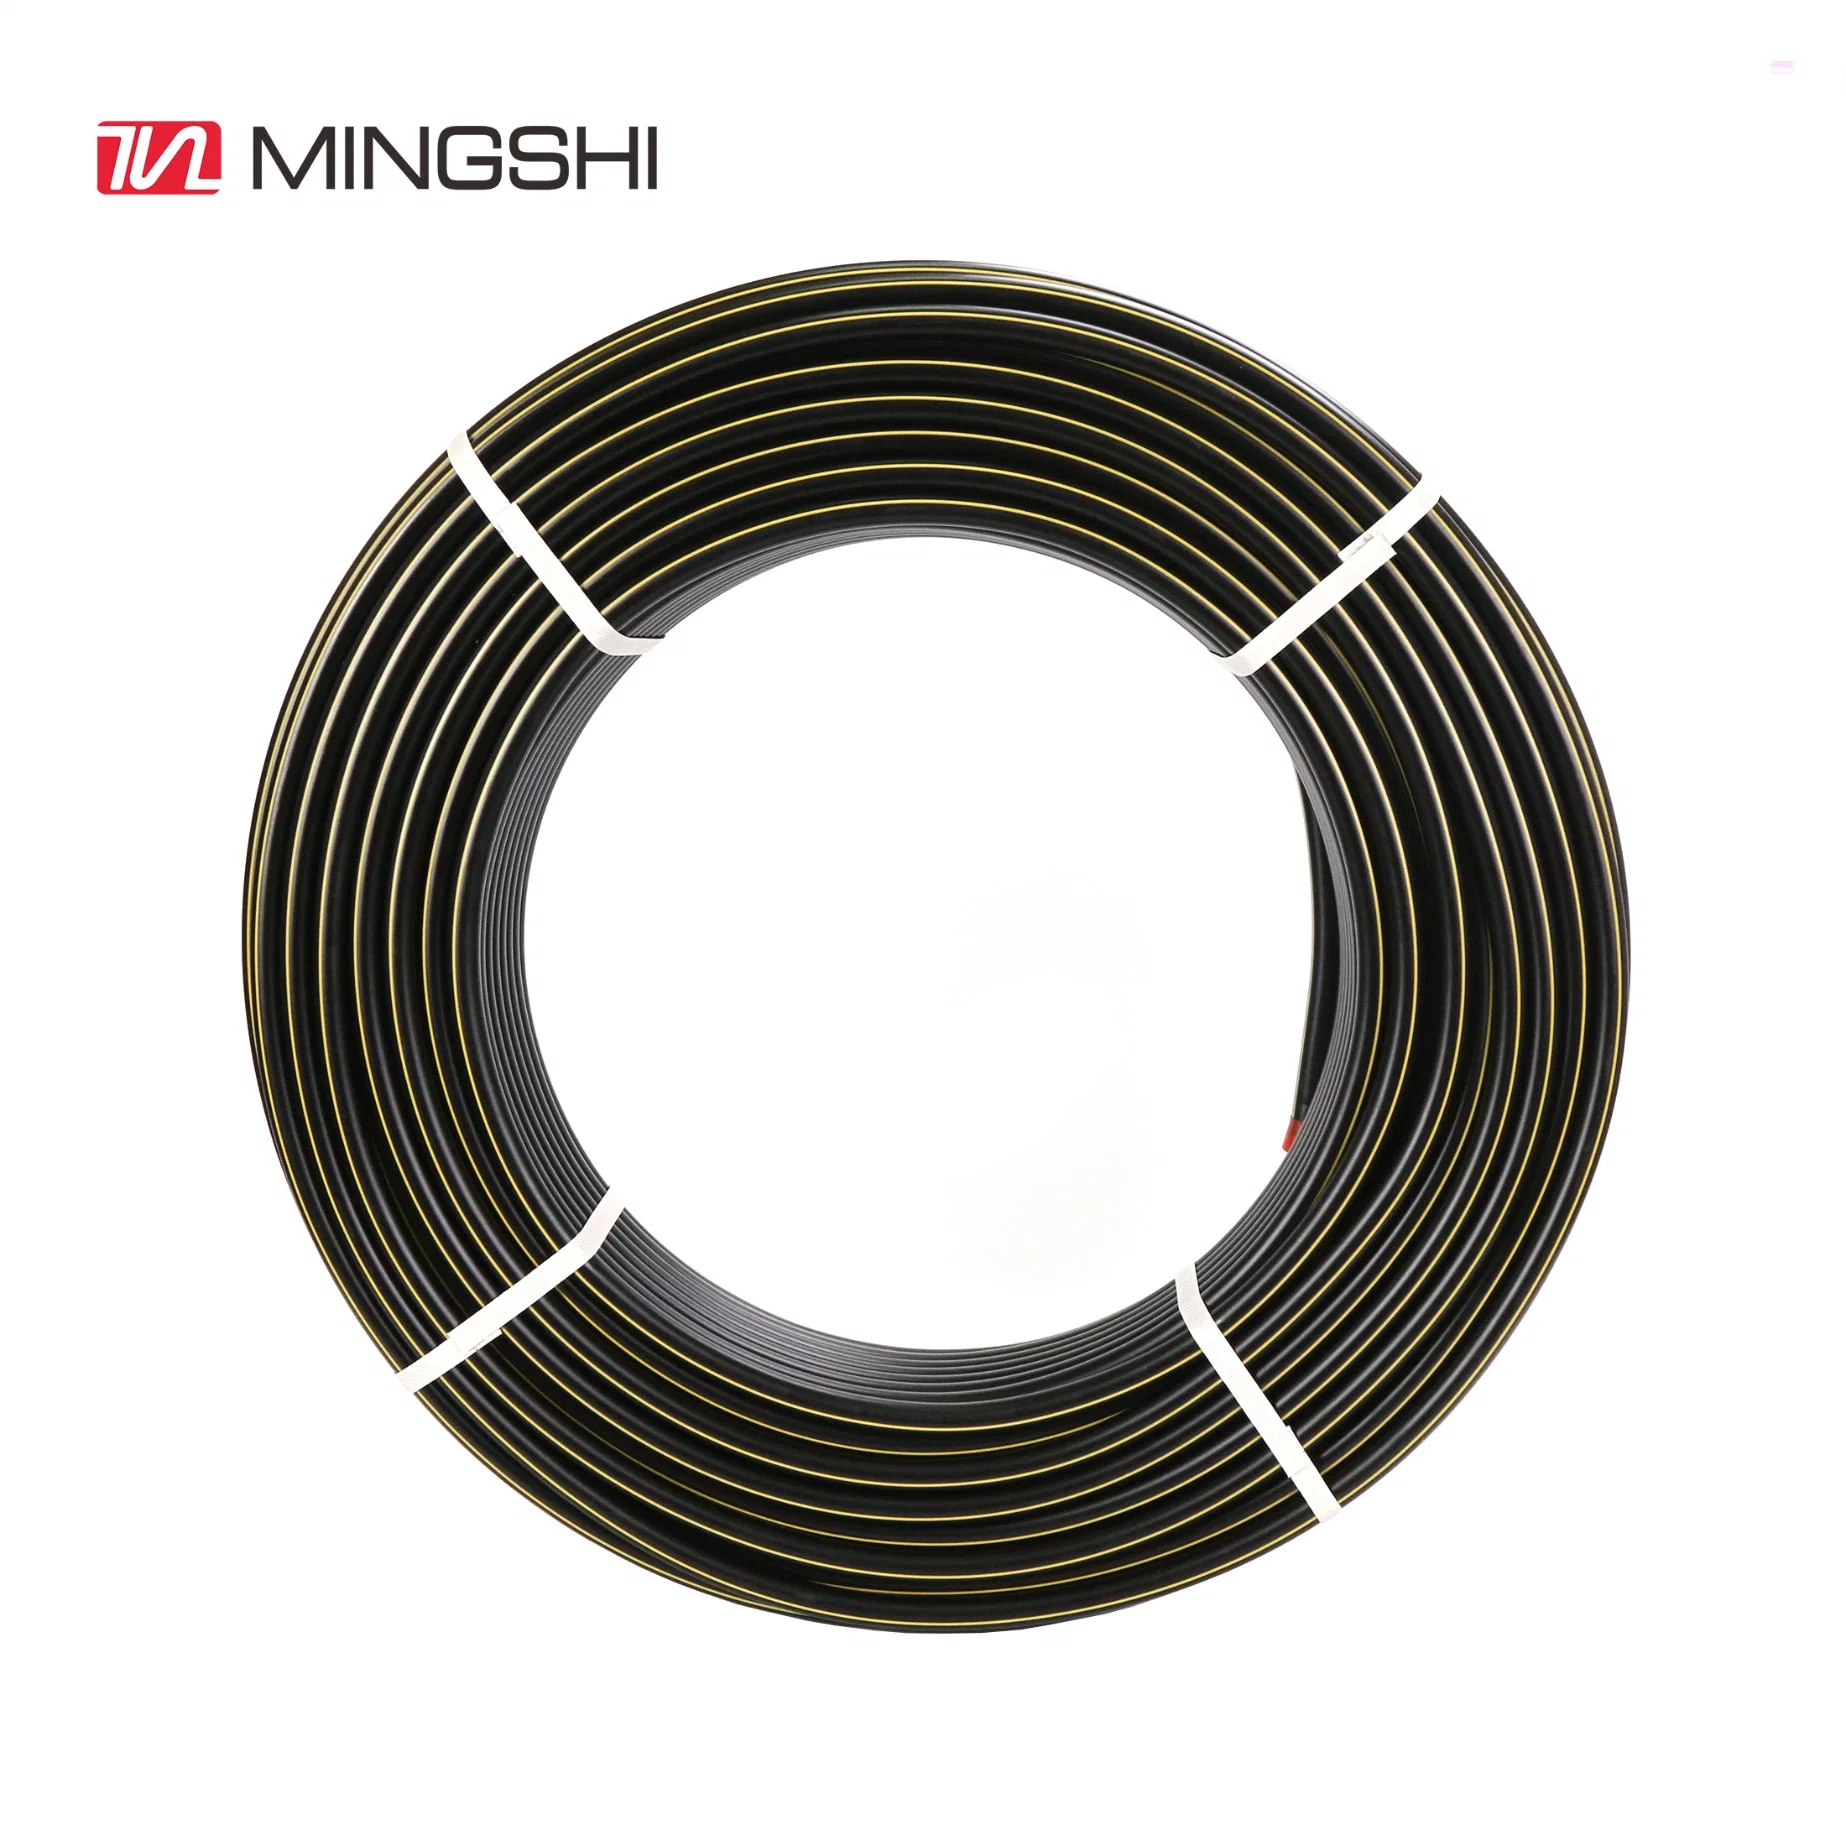 Mingshi Cold Water Pipe PE/Al/PE Overlapped with Aenor/Wras/Watermark/Acs